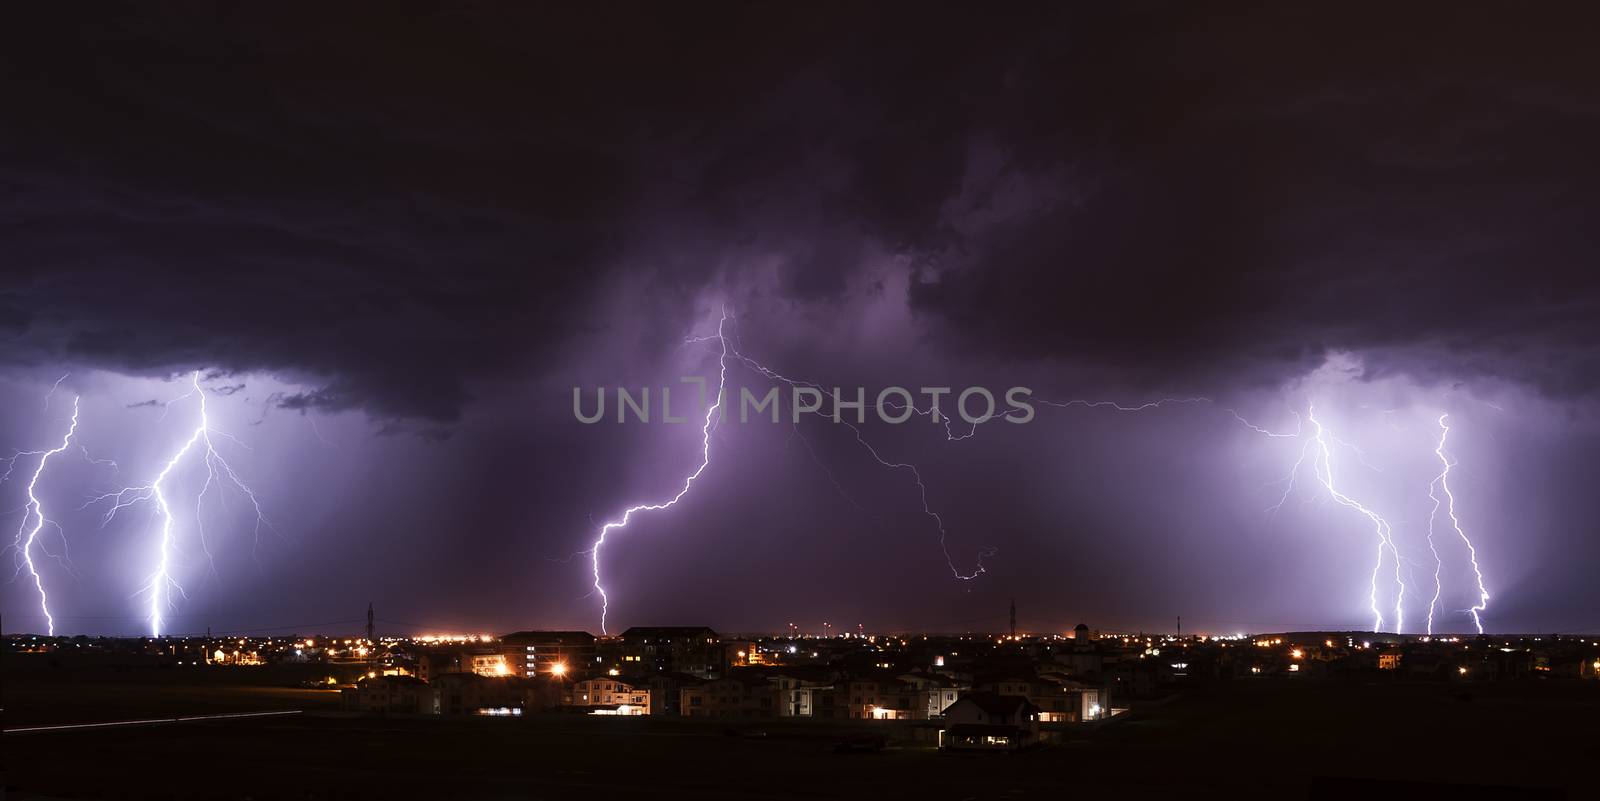 Severe lightning storm over a small city